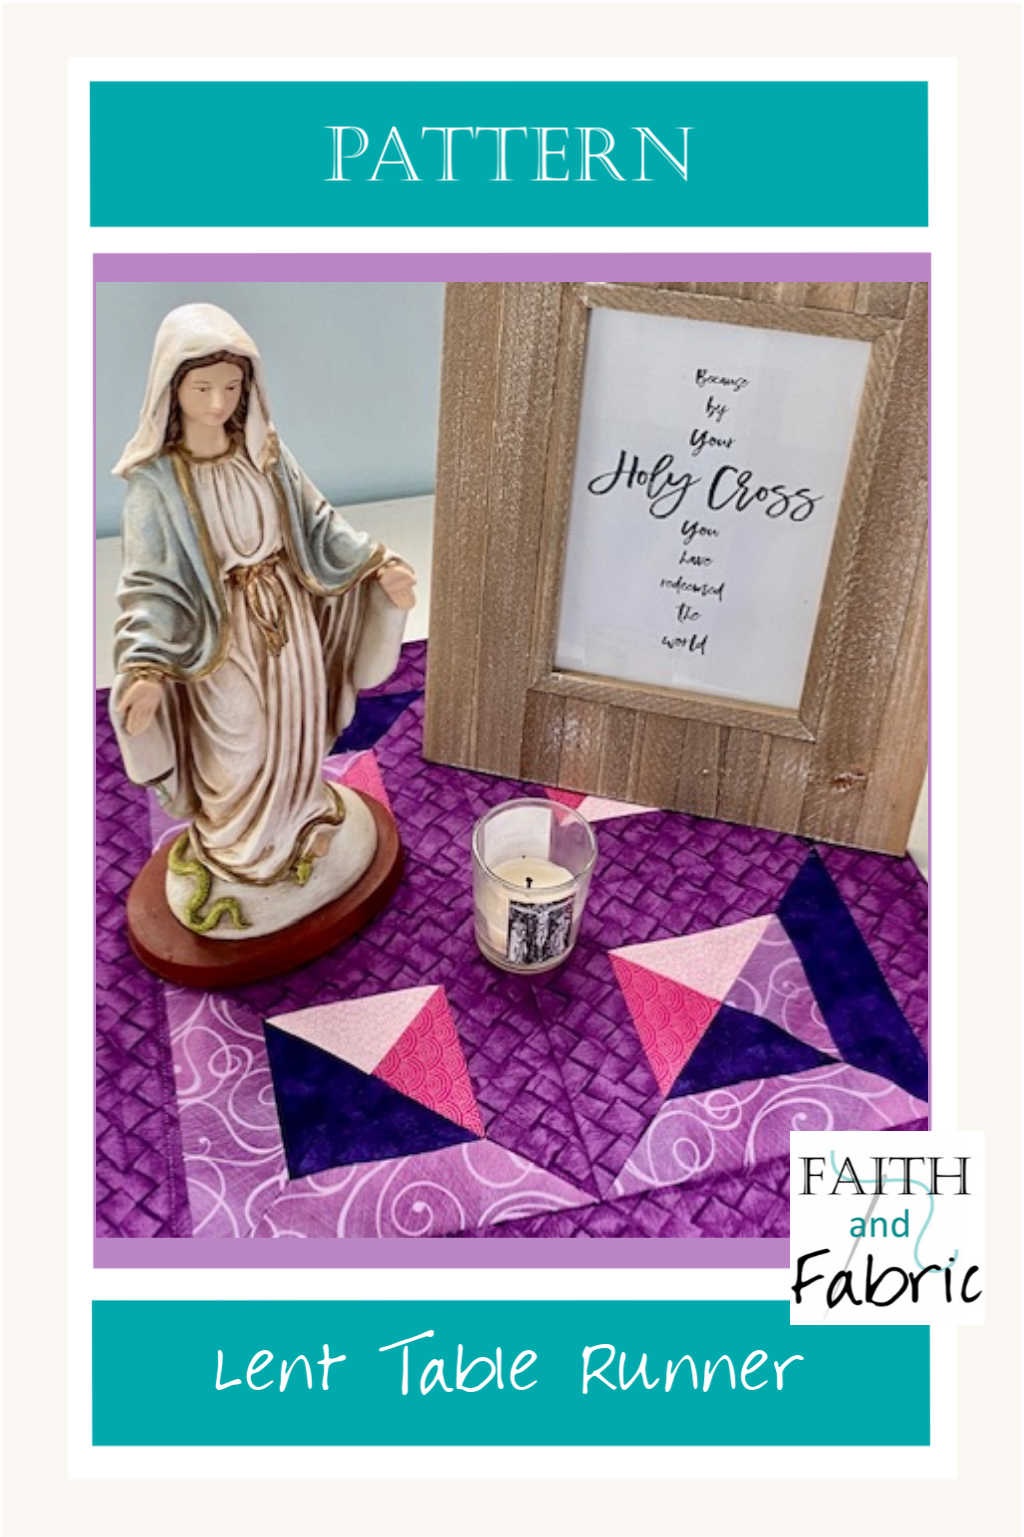 Have fun sewing this Lent table runner quilt! This Christian quilt pattern works for Easter, too, as it's reversible. Add more quilt blocks to make the quilt fit any table in your home as you decorate to celebrate this special Lenten season!